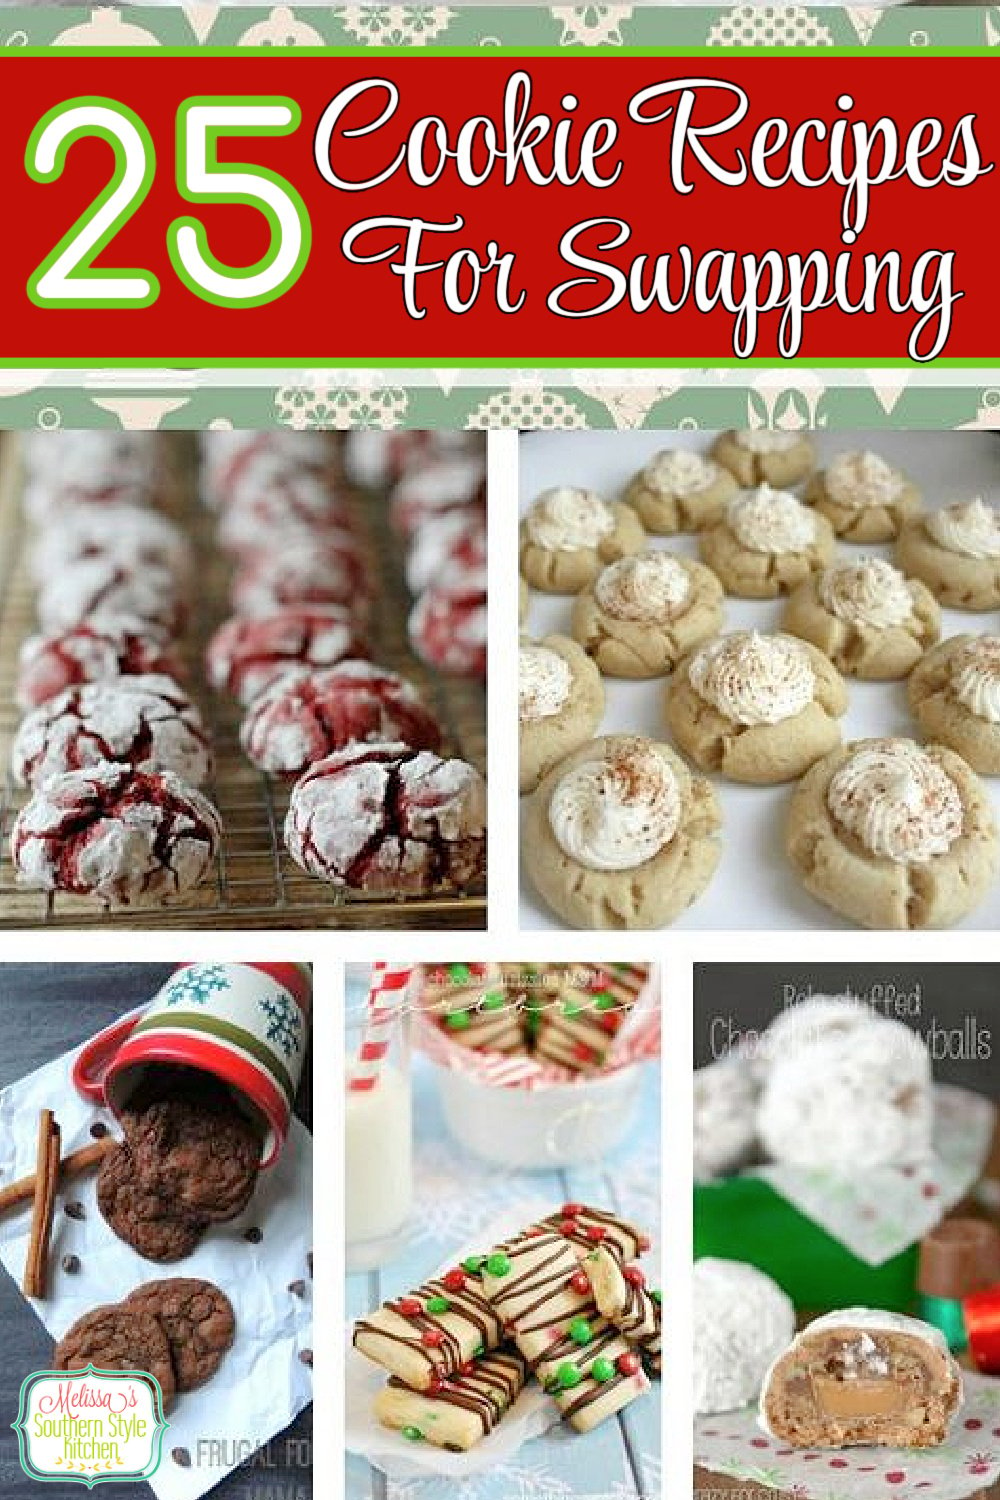 25-cookies-for-swapping-pin via @melissasssk